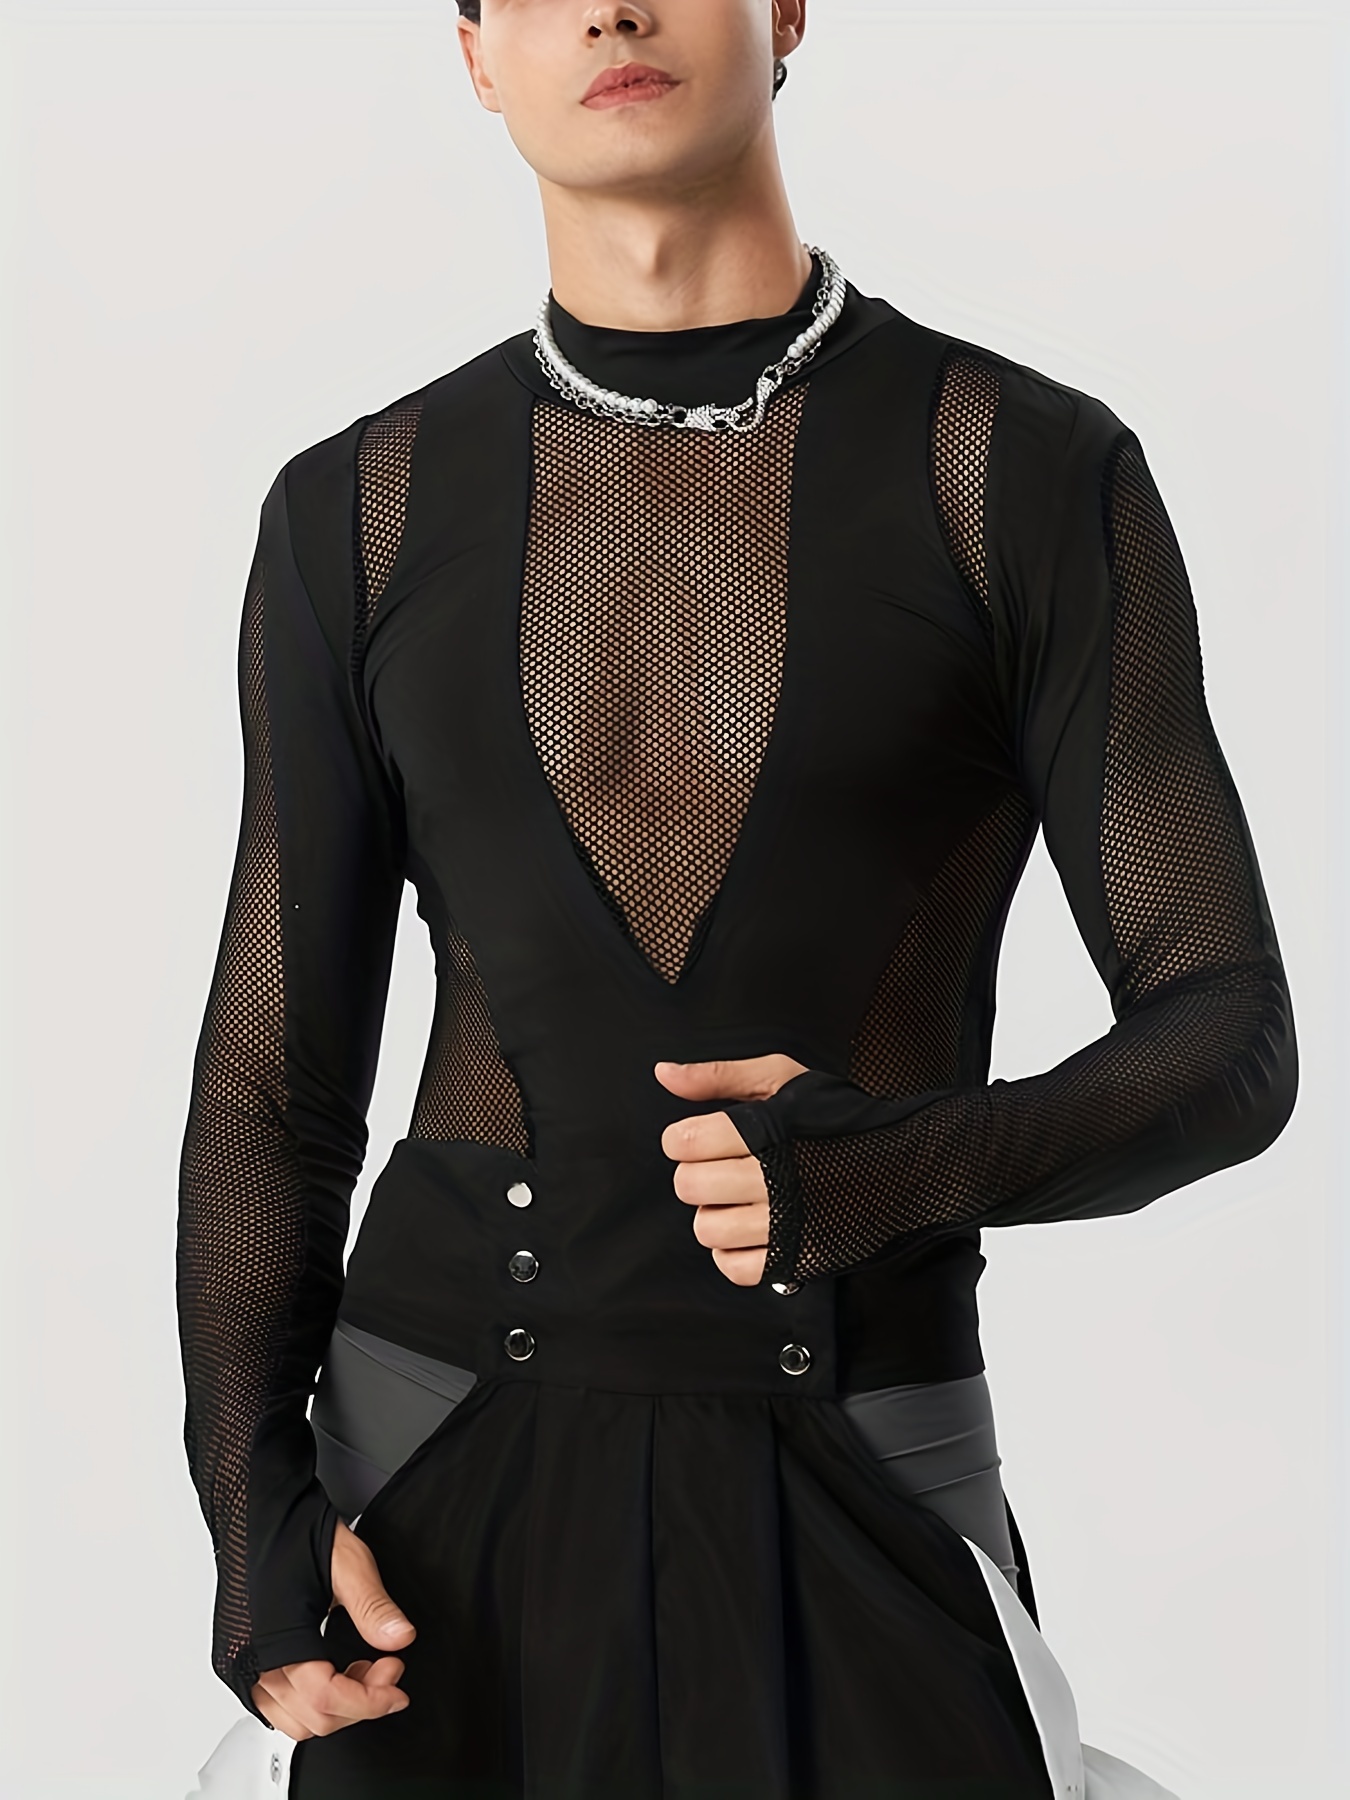 Women's Mesh Crop Top Long Sleeve Black See-through Sheer Shirts for Club  Party Night Sexy Slim Fitted Transparent Net Top White